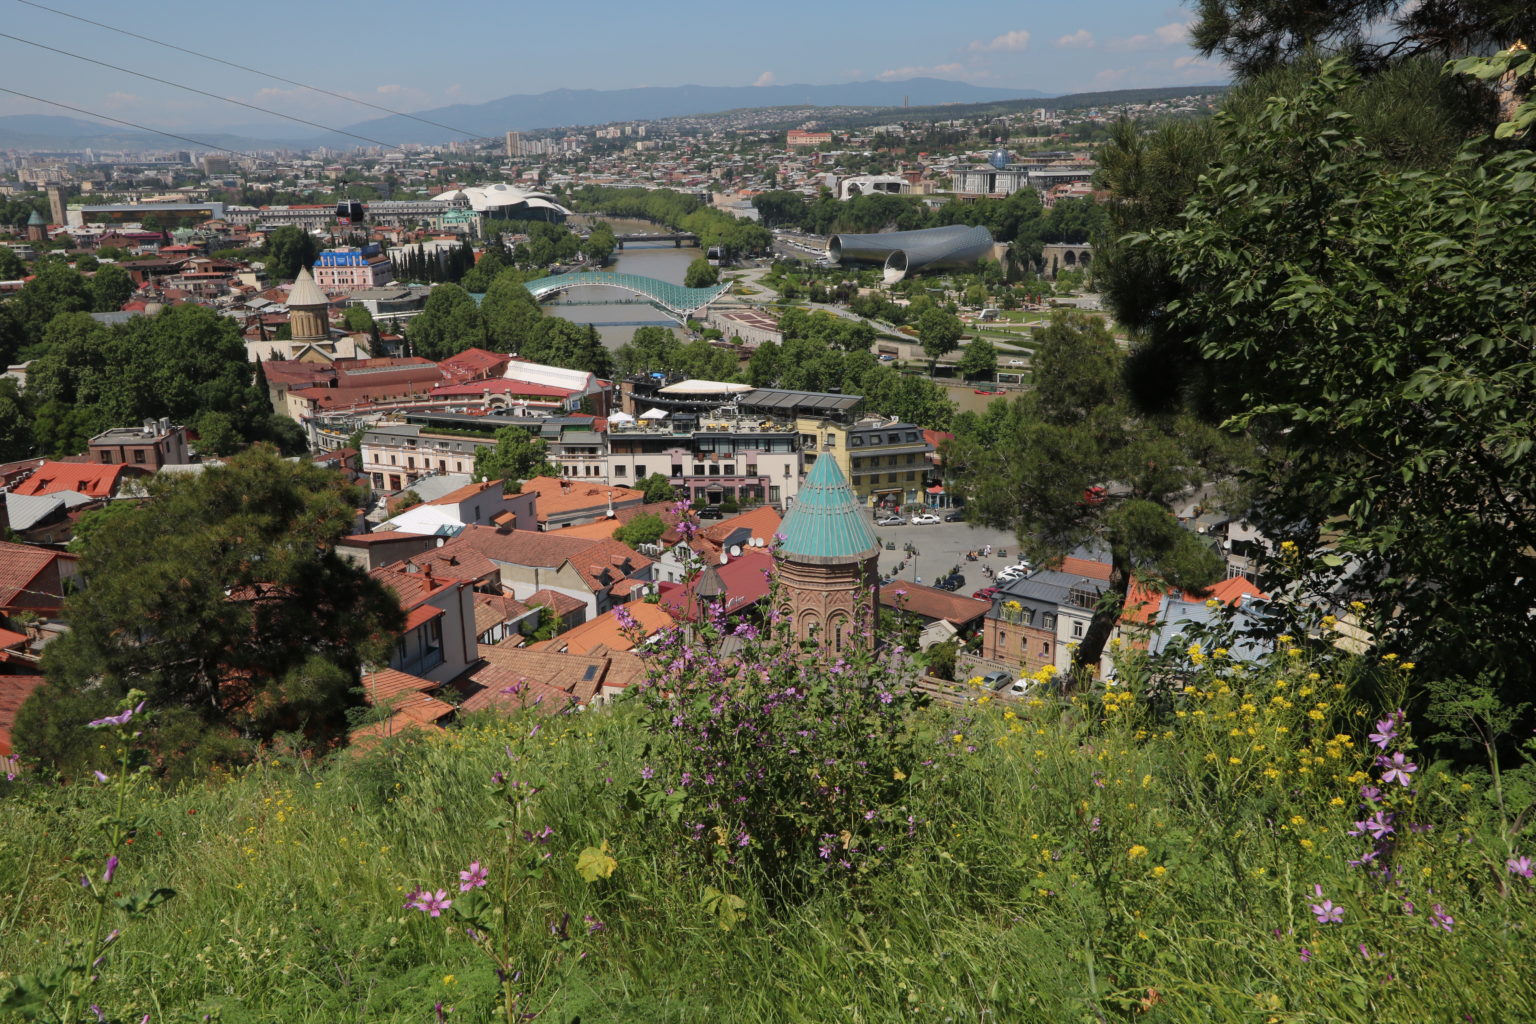 Tbilisi or Yerevan: which to visit?